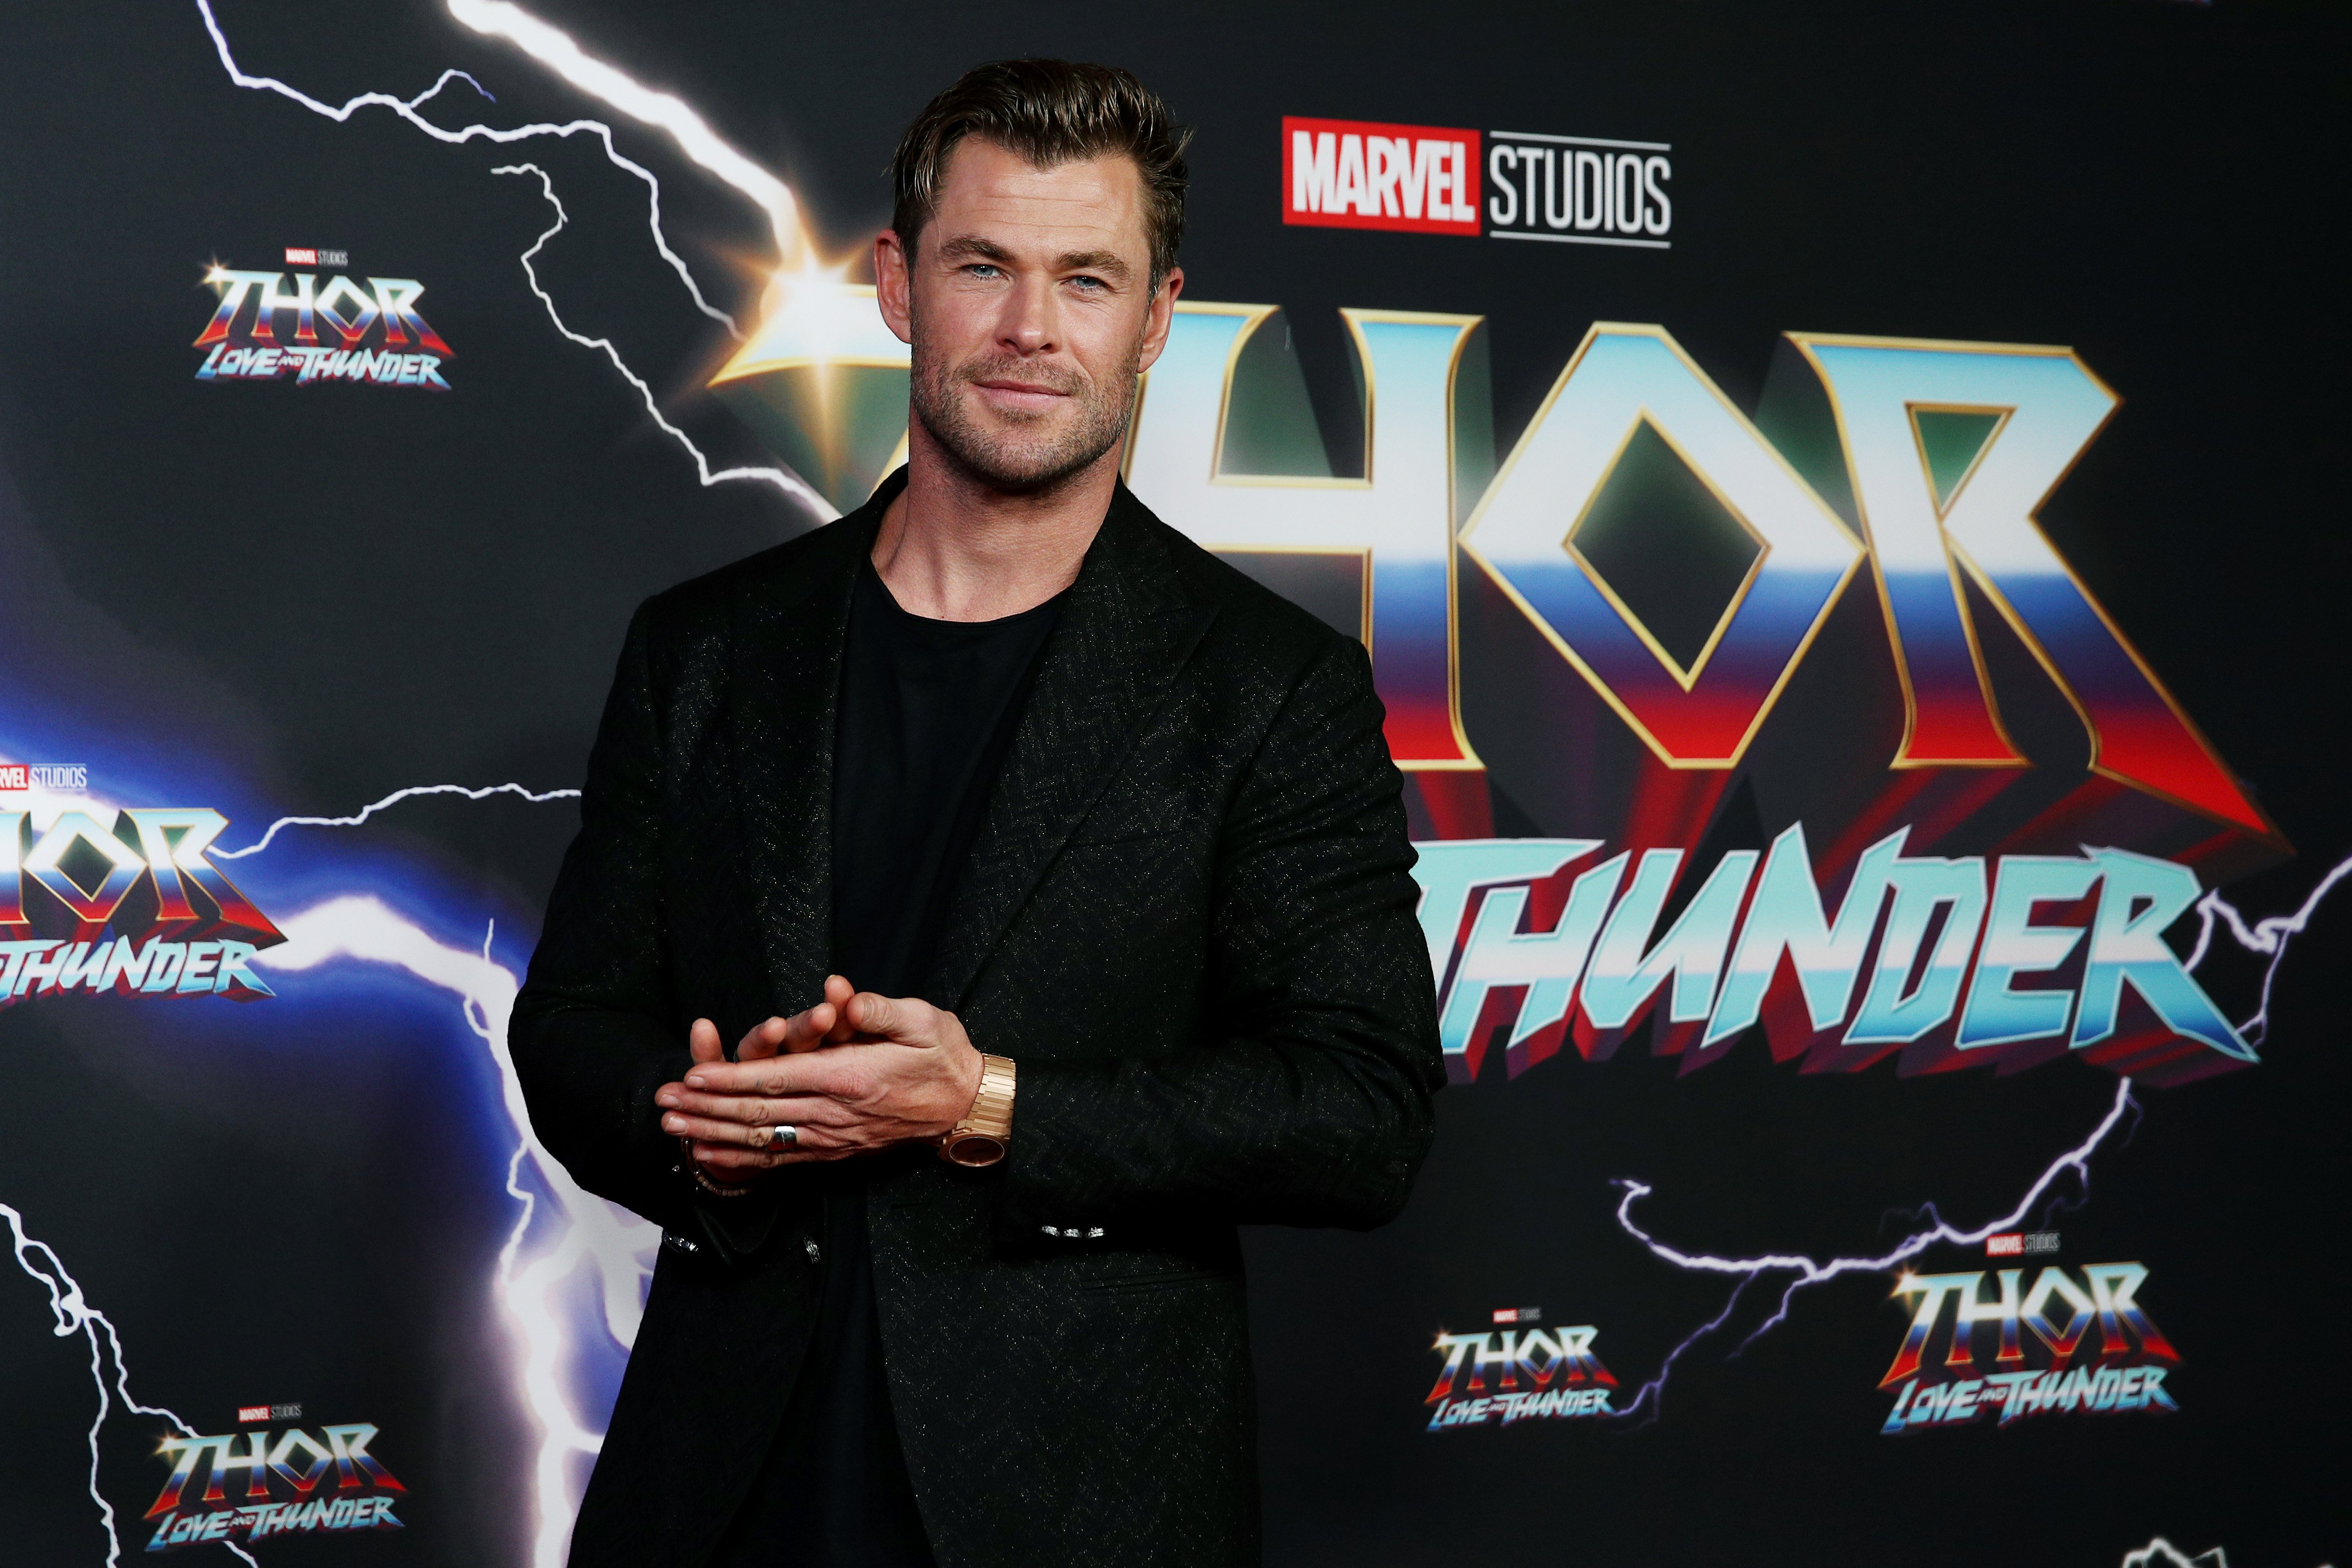 Chris Hemsworth, who stars as Thor in the MCU, wears a black suit over a black shirt.